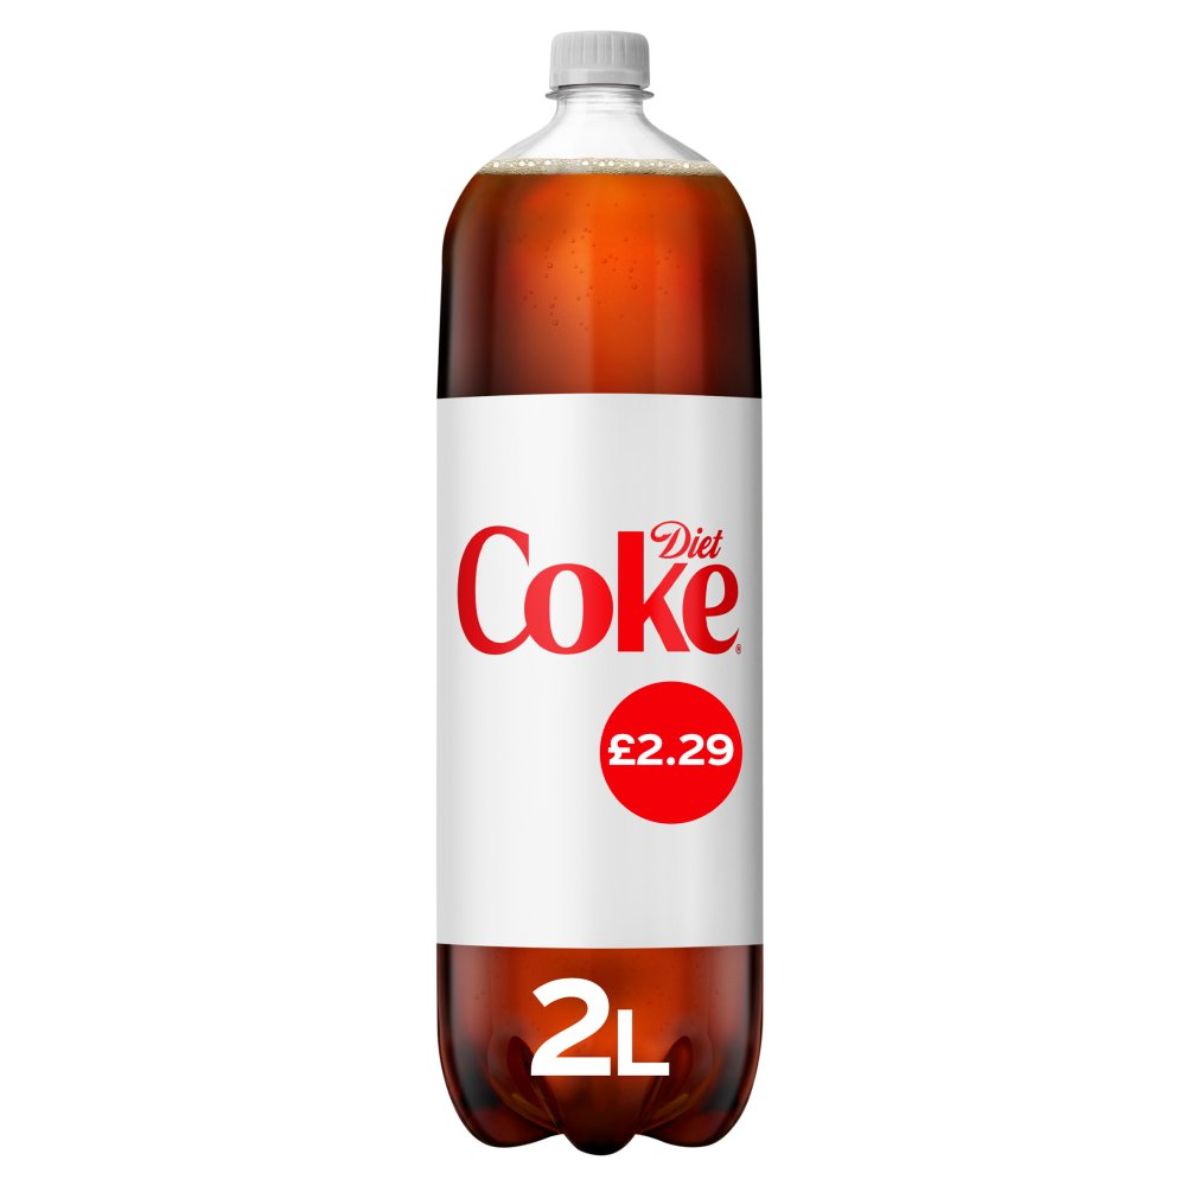 2-liter bottle of Diet Coke - Cola - 2L with a white label, marked £2.29, on a white background.